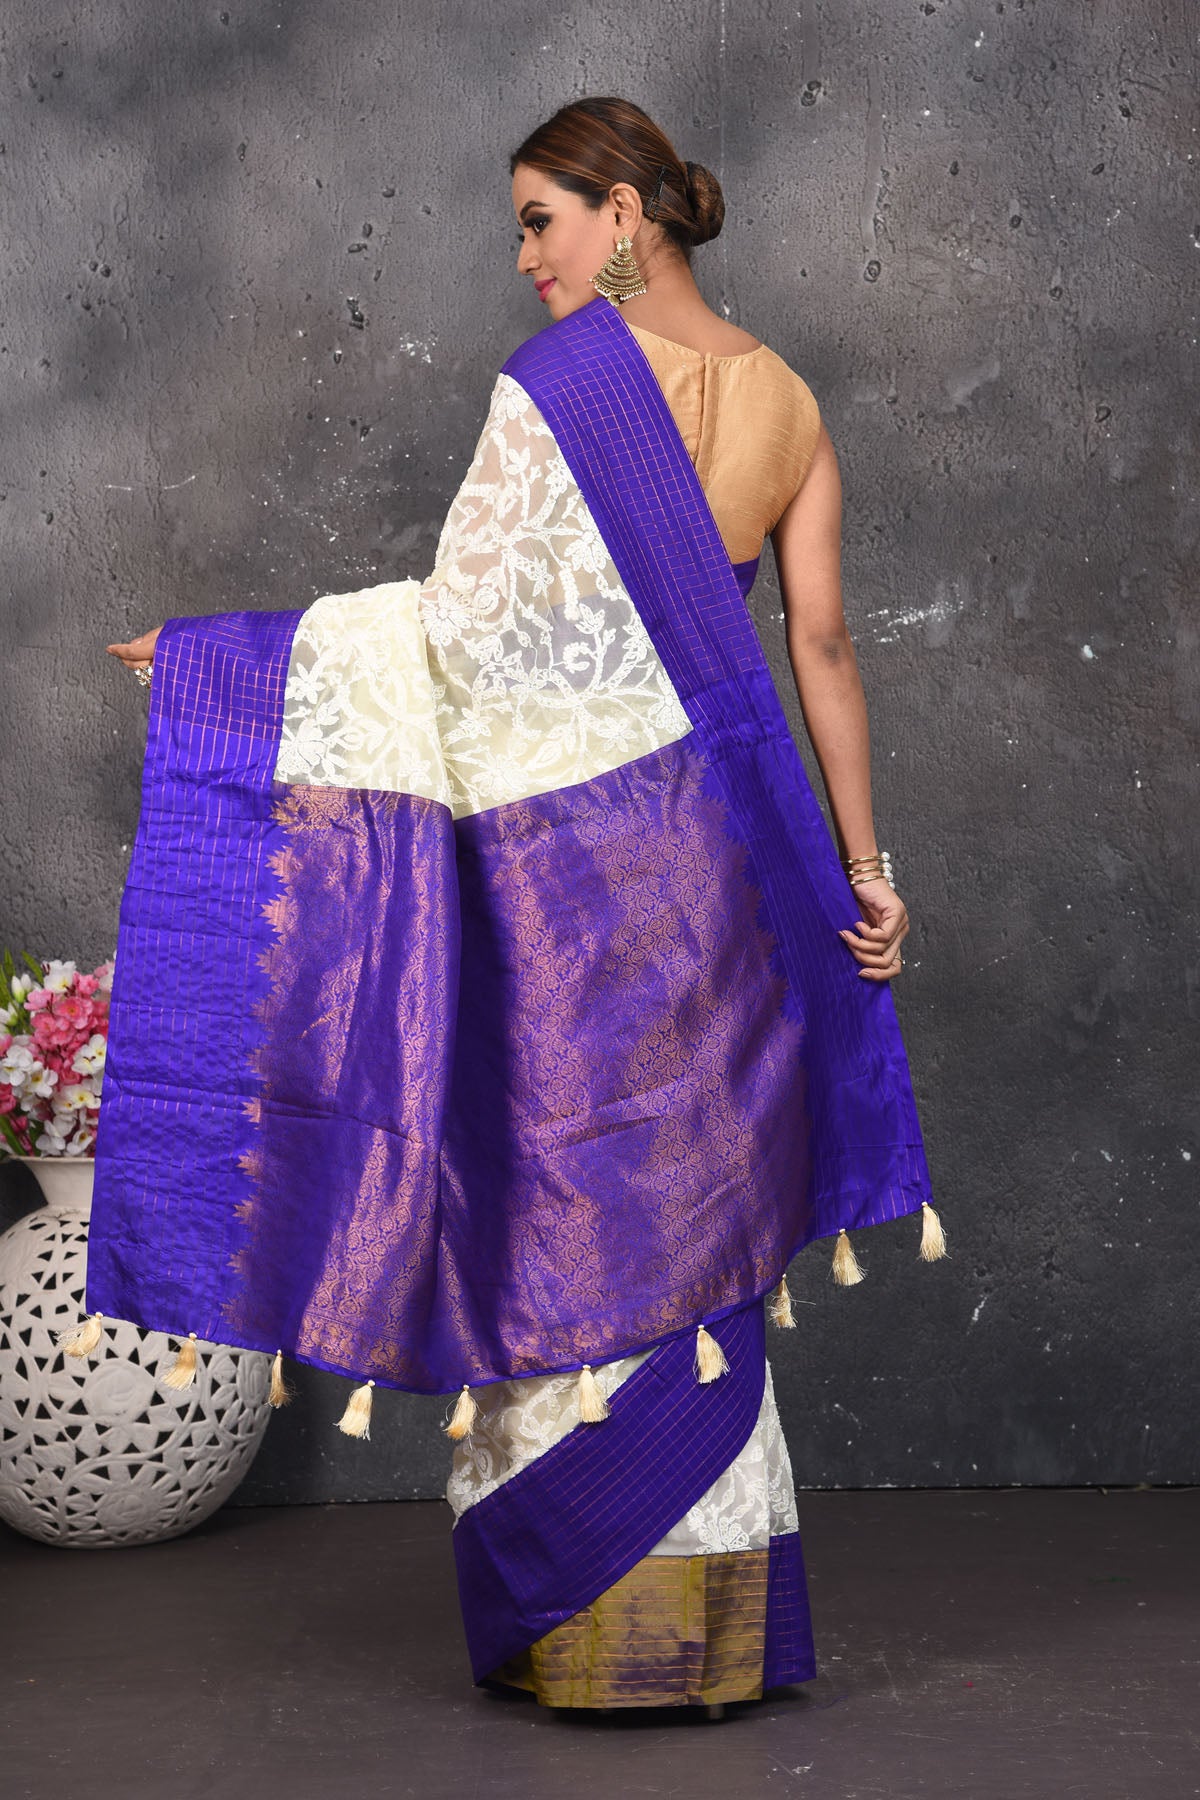 Buy this exquisite Off-white and violet chiffon box printed saree with chikankari hand-embroidered online in USA. Style this lucknawi sari with a potli bag and high heels for a flawless look which has gorgeous heavy pallu with dull-gold zari work. This saree is definitely the epitome of beauty and a must have in your collection. Buy designer handwoven chikankari sari with any blouse from Pure Elegance Indian saree store in USA.- Back view with open pallu.